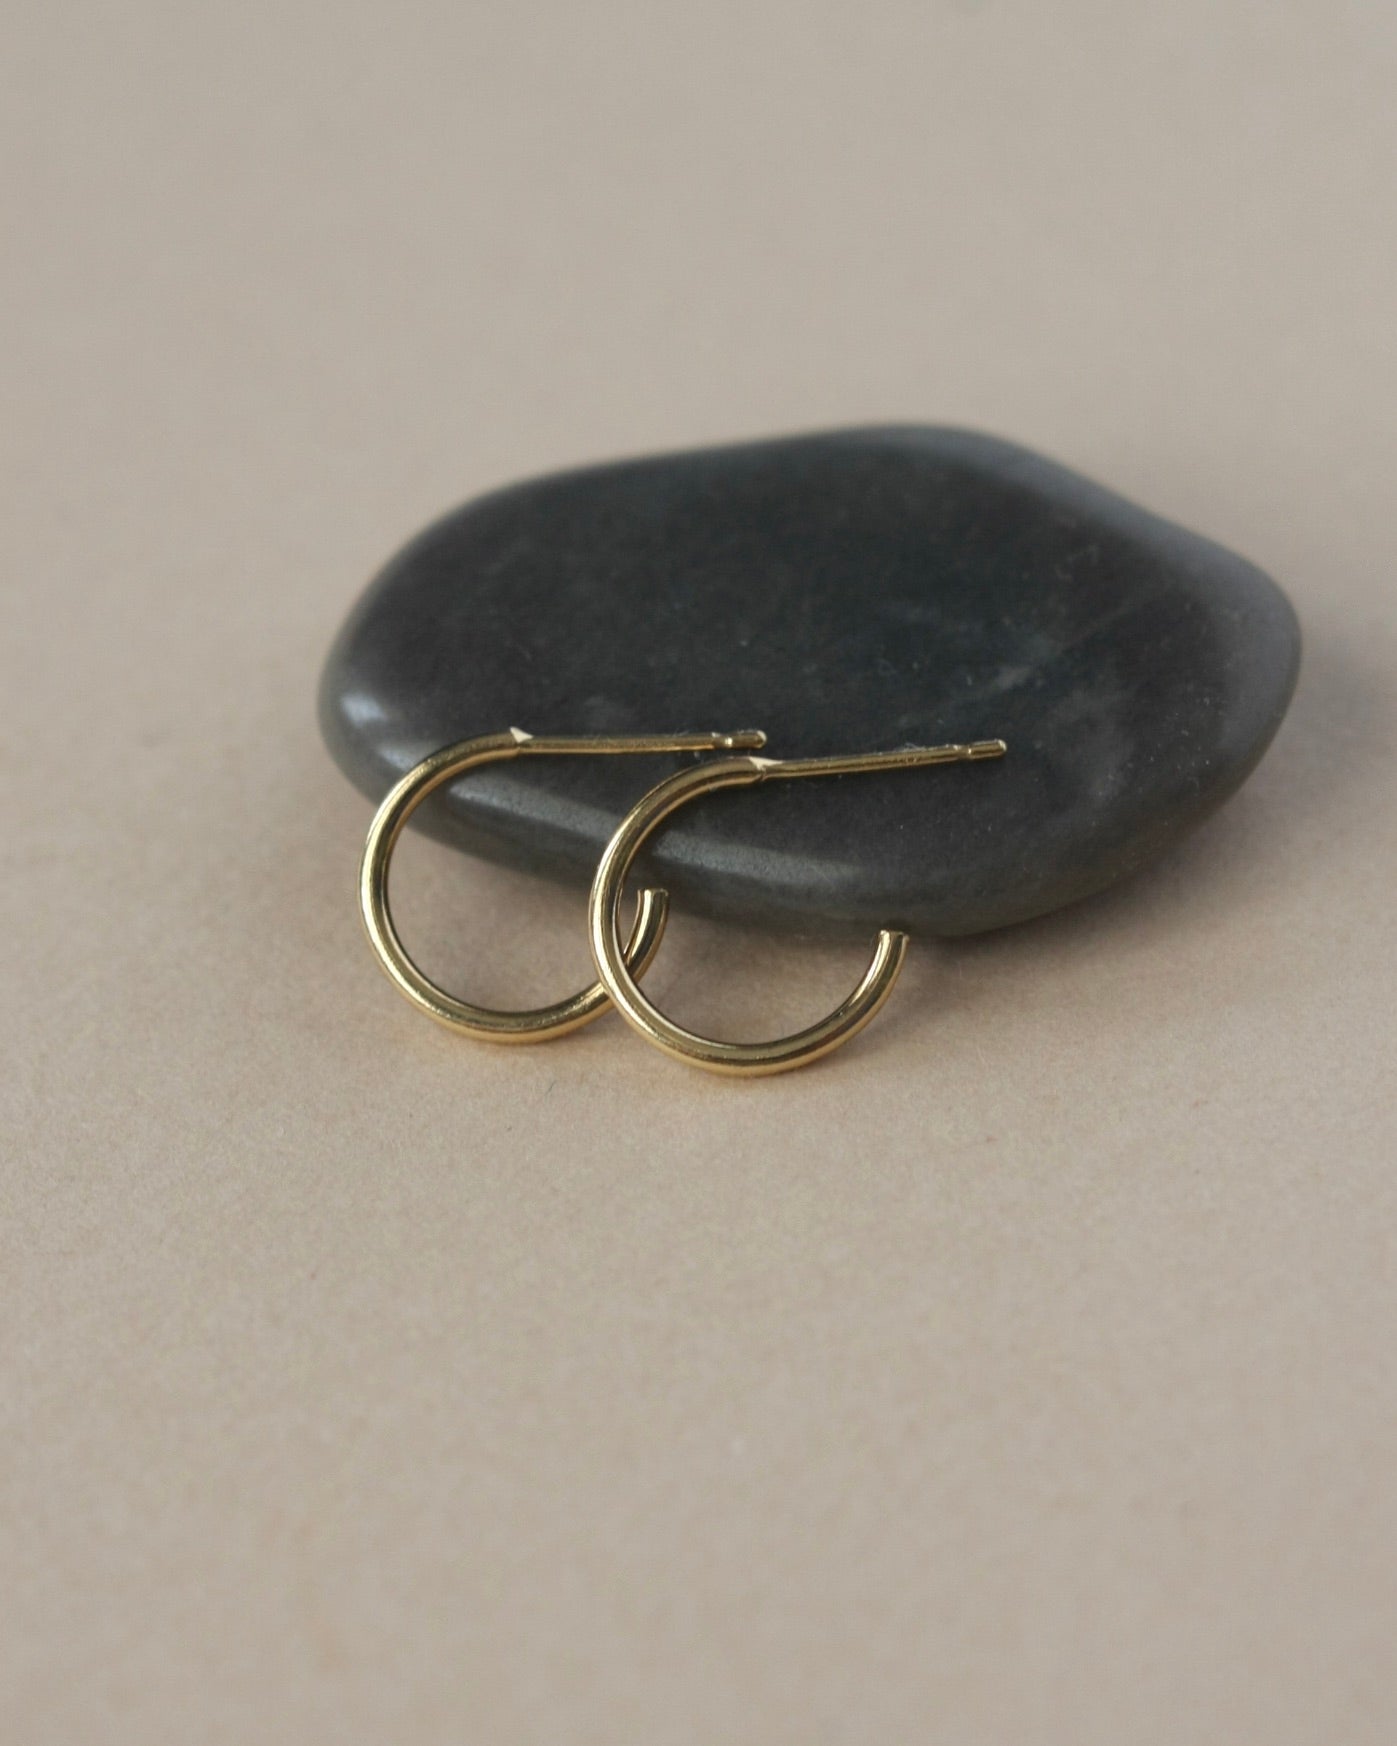 Small Hammered Gold Hoop Earrings